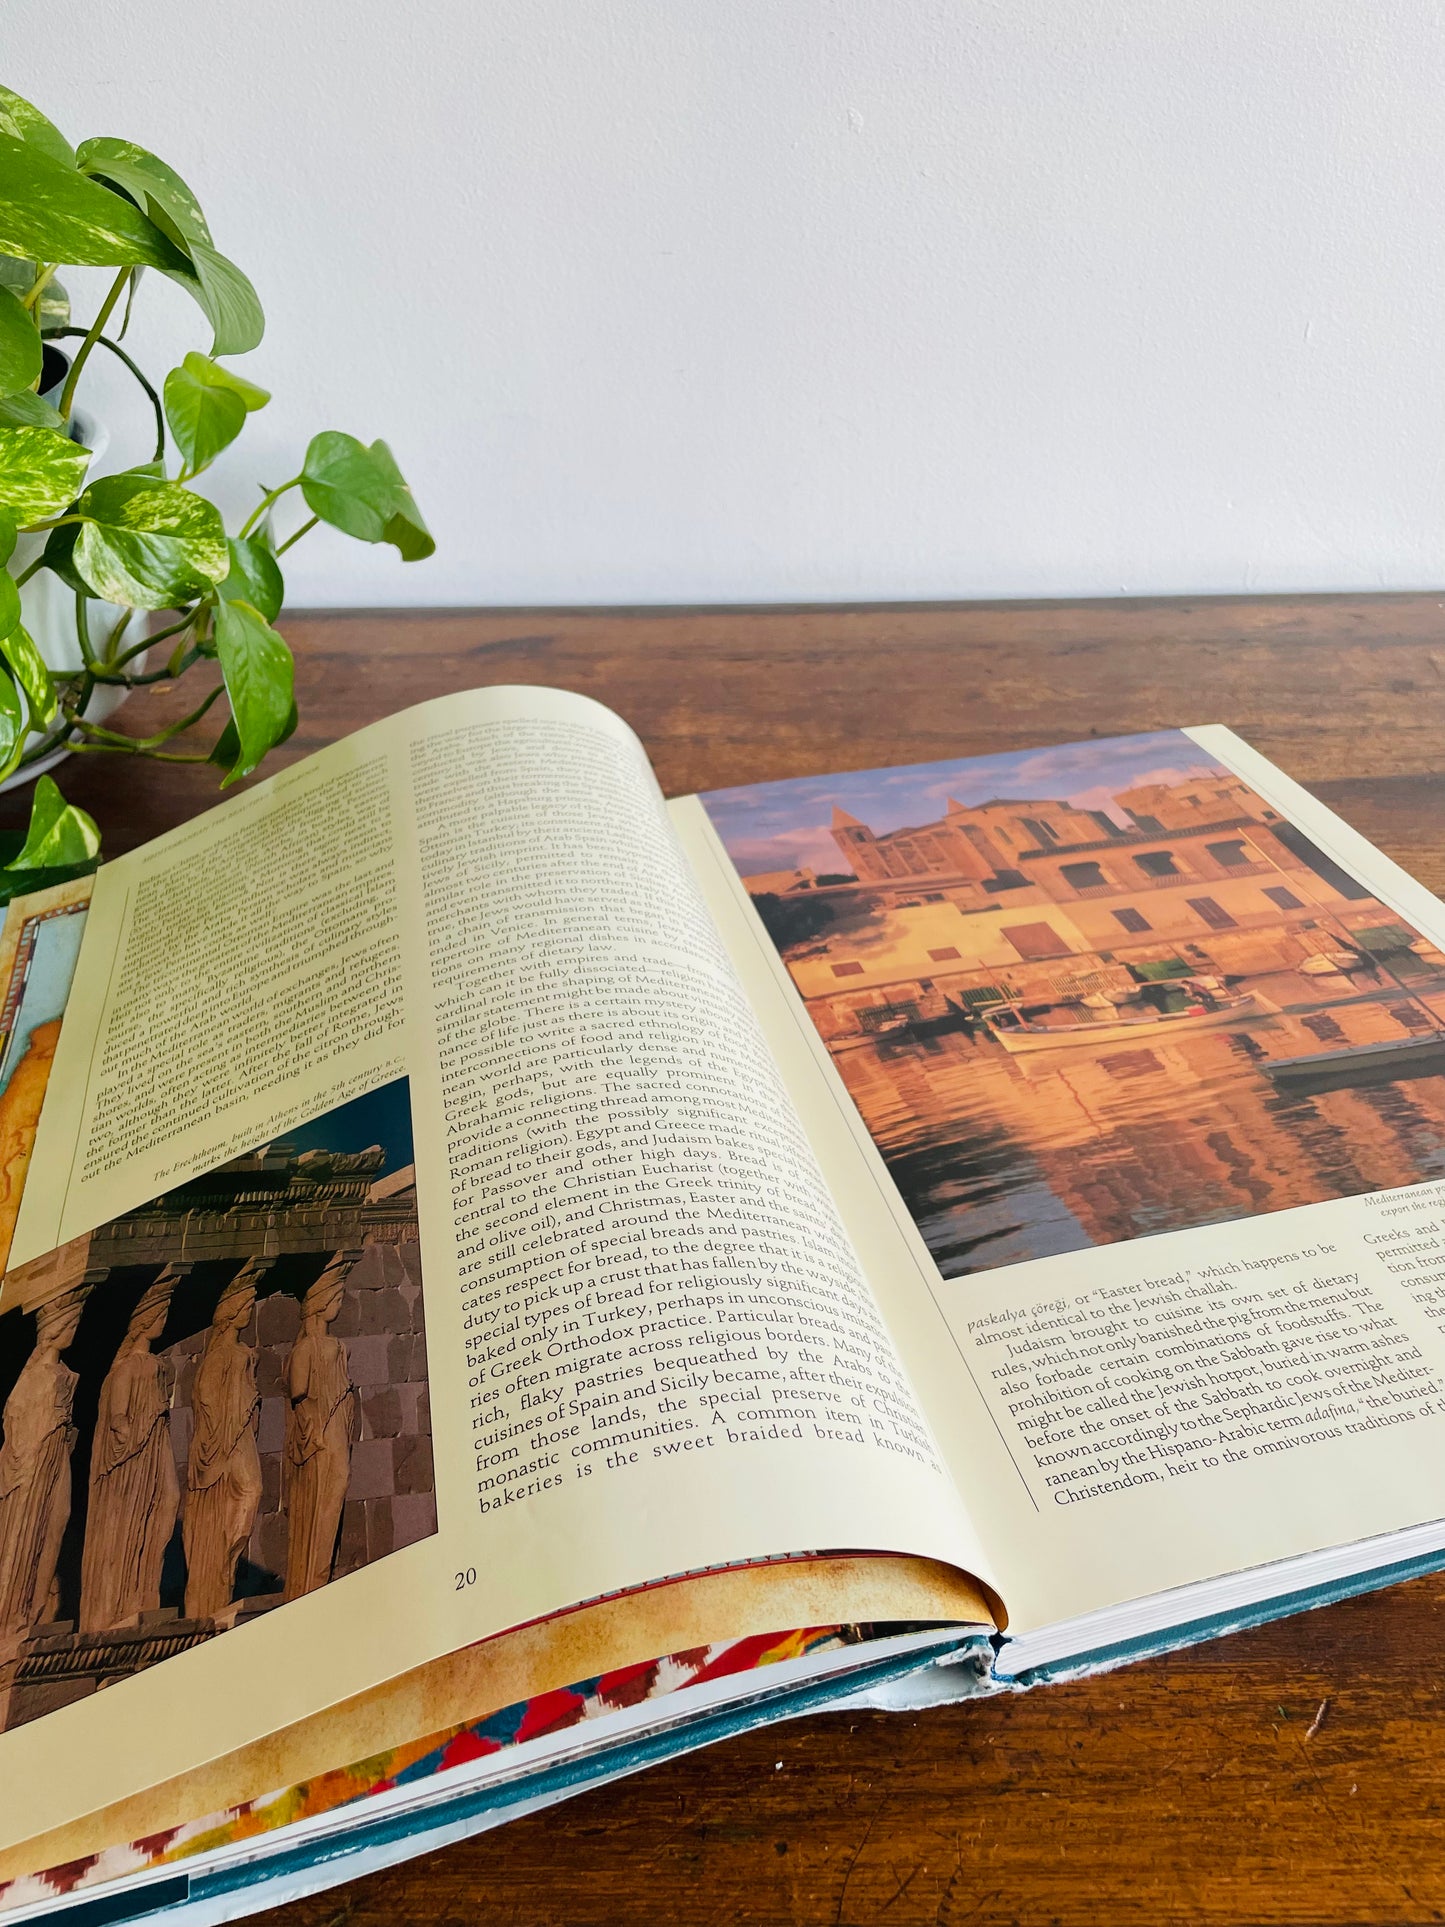 Joyce Goldstein's Mediterranean: The Beautiful Cookbook - Giant Hardcover Book with Photos (1994)